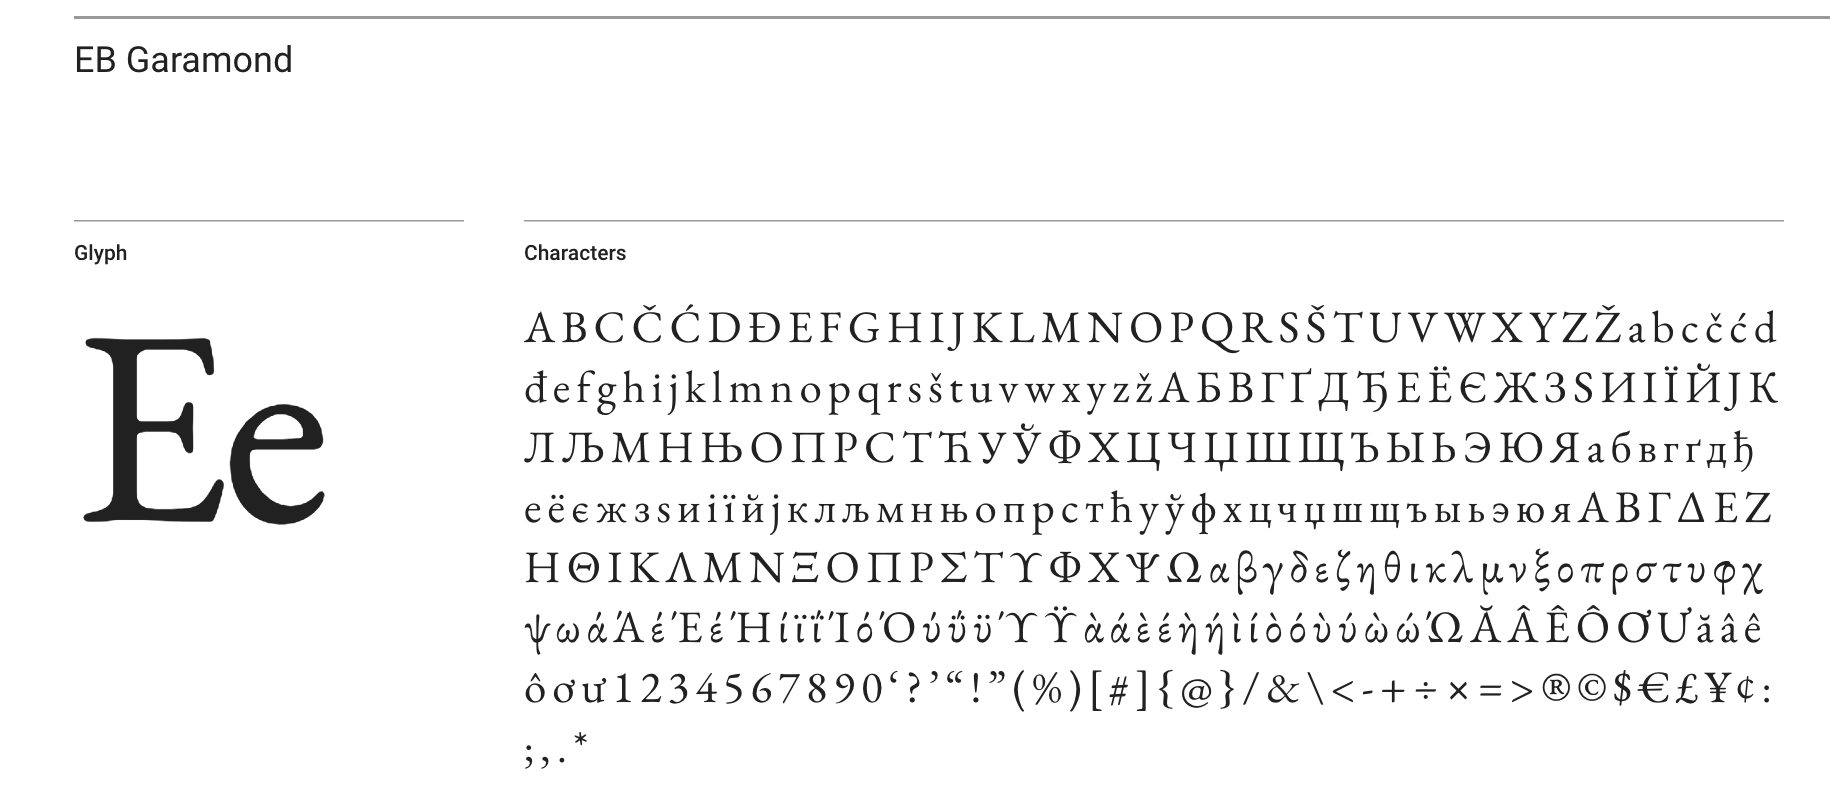 letters in EB Garamond typeface